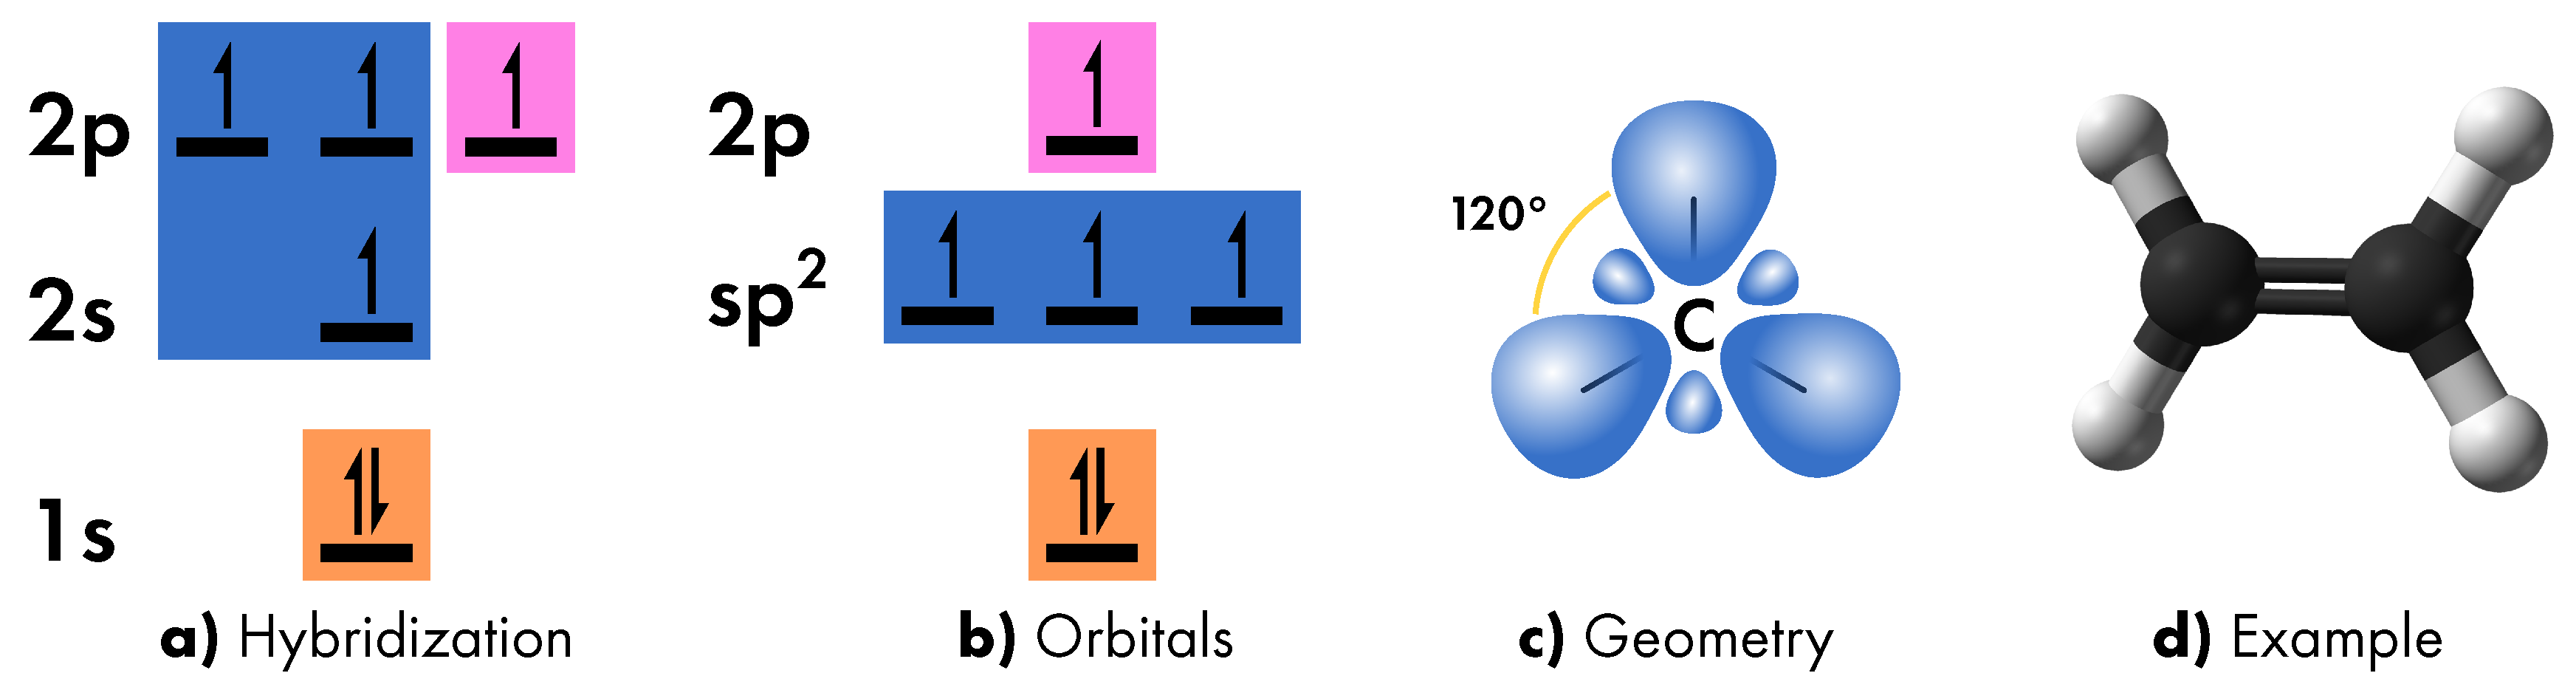 Figure 4.(a). orbitals, and (d) example of such hybridization in ethene mol...